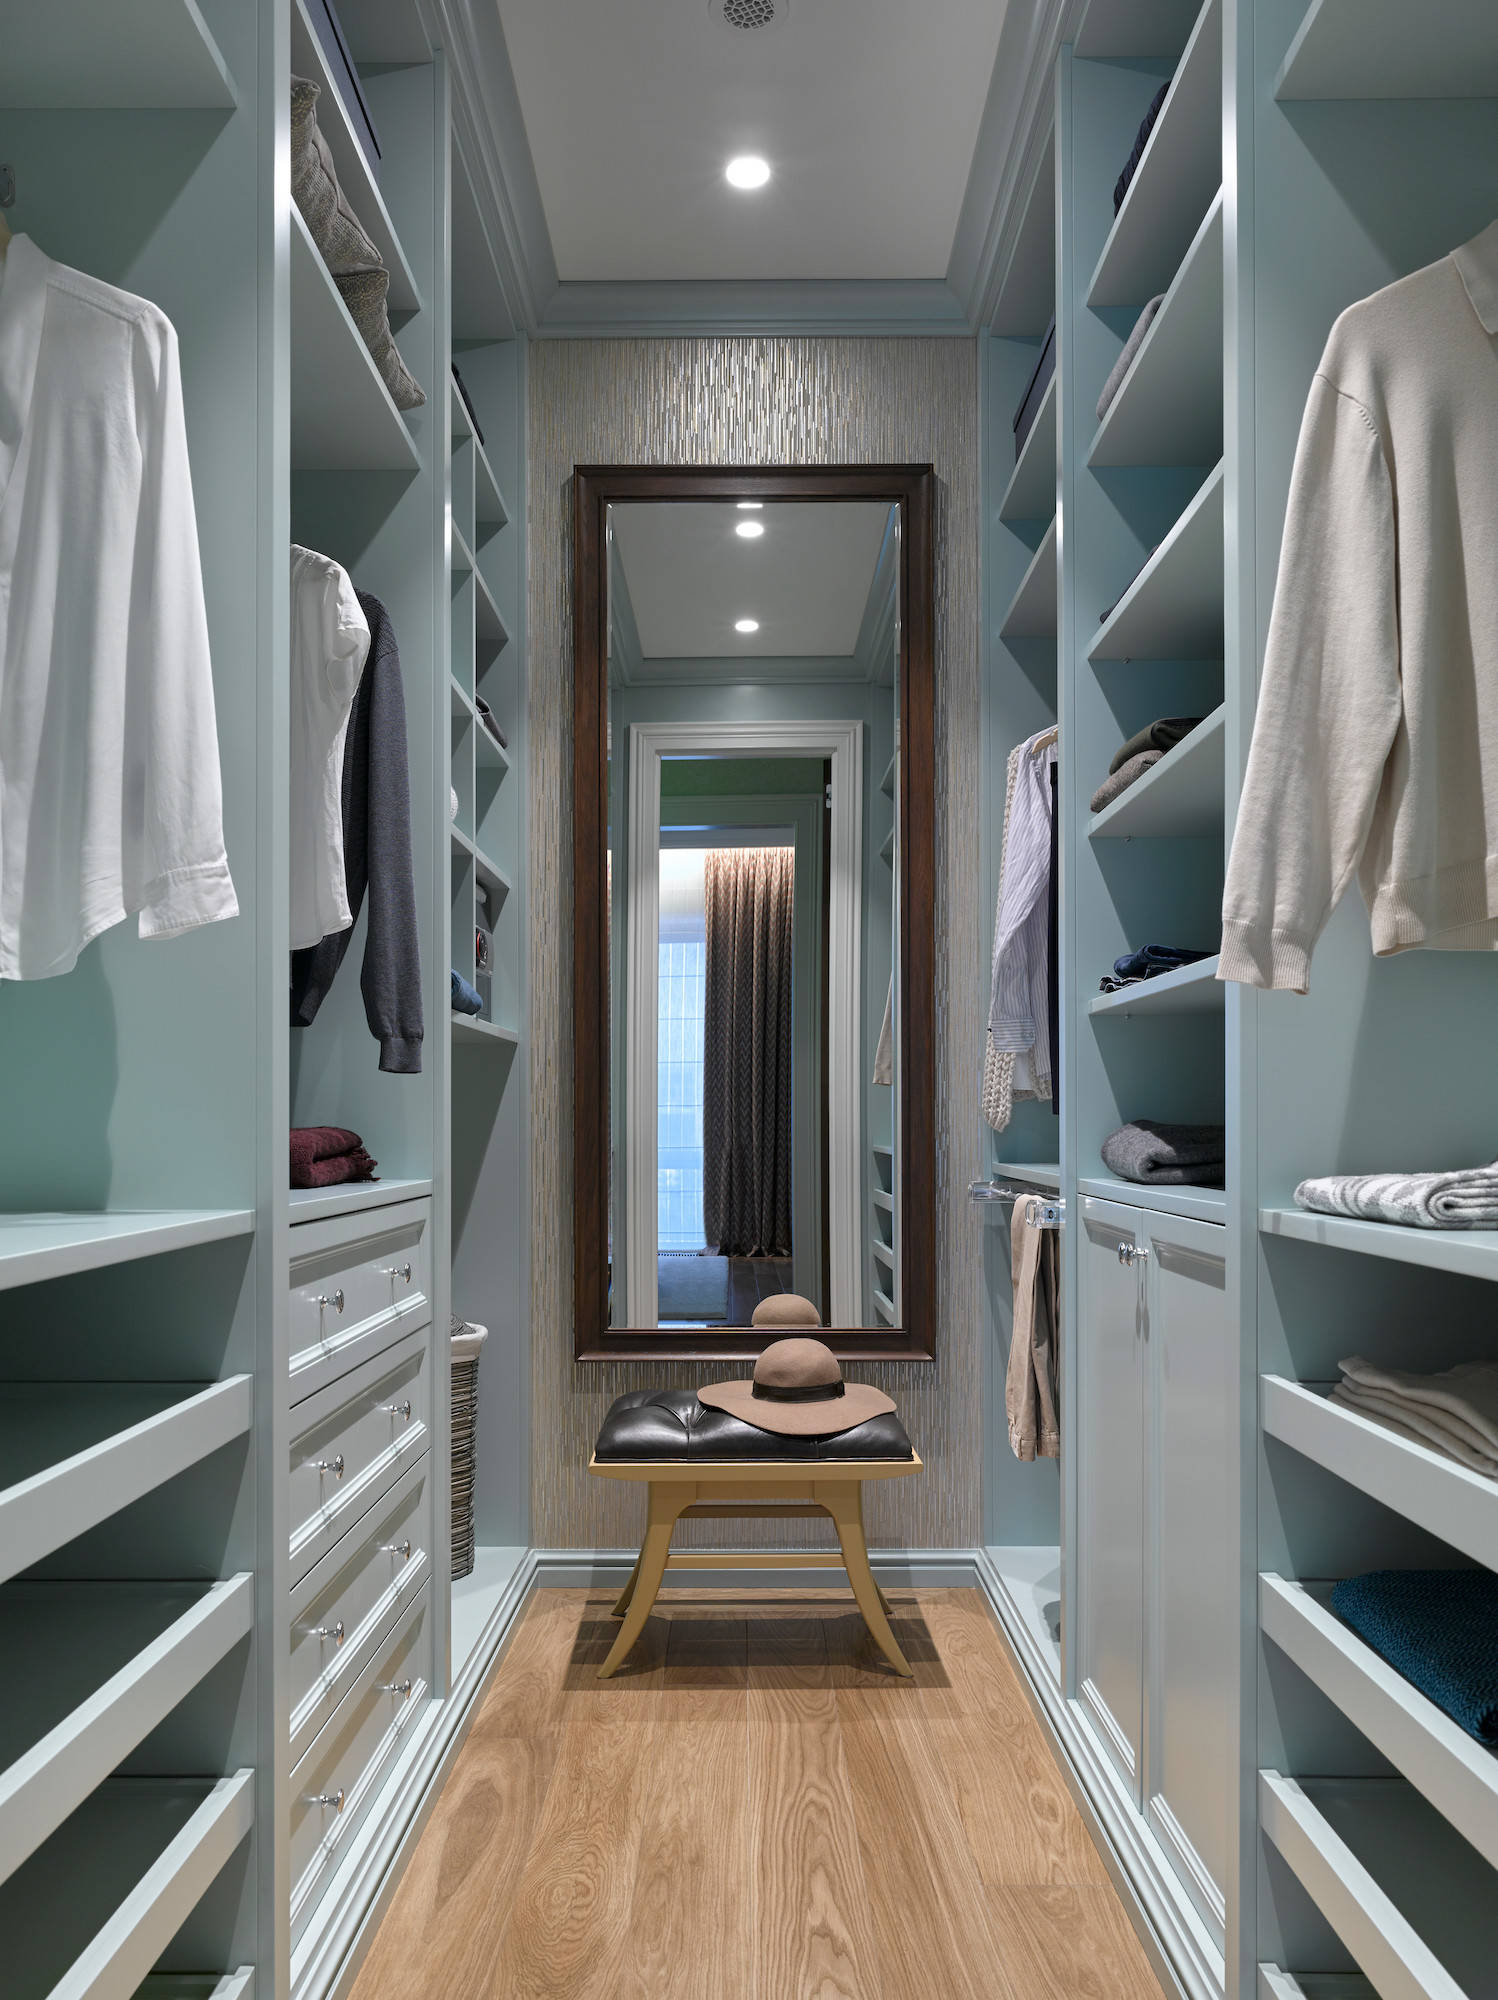 Small Walk In Closet Pictures Ideas, Small Walk In Closet Shelving